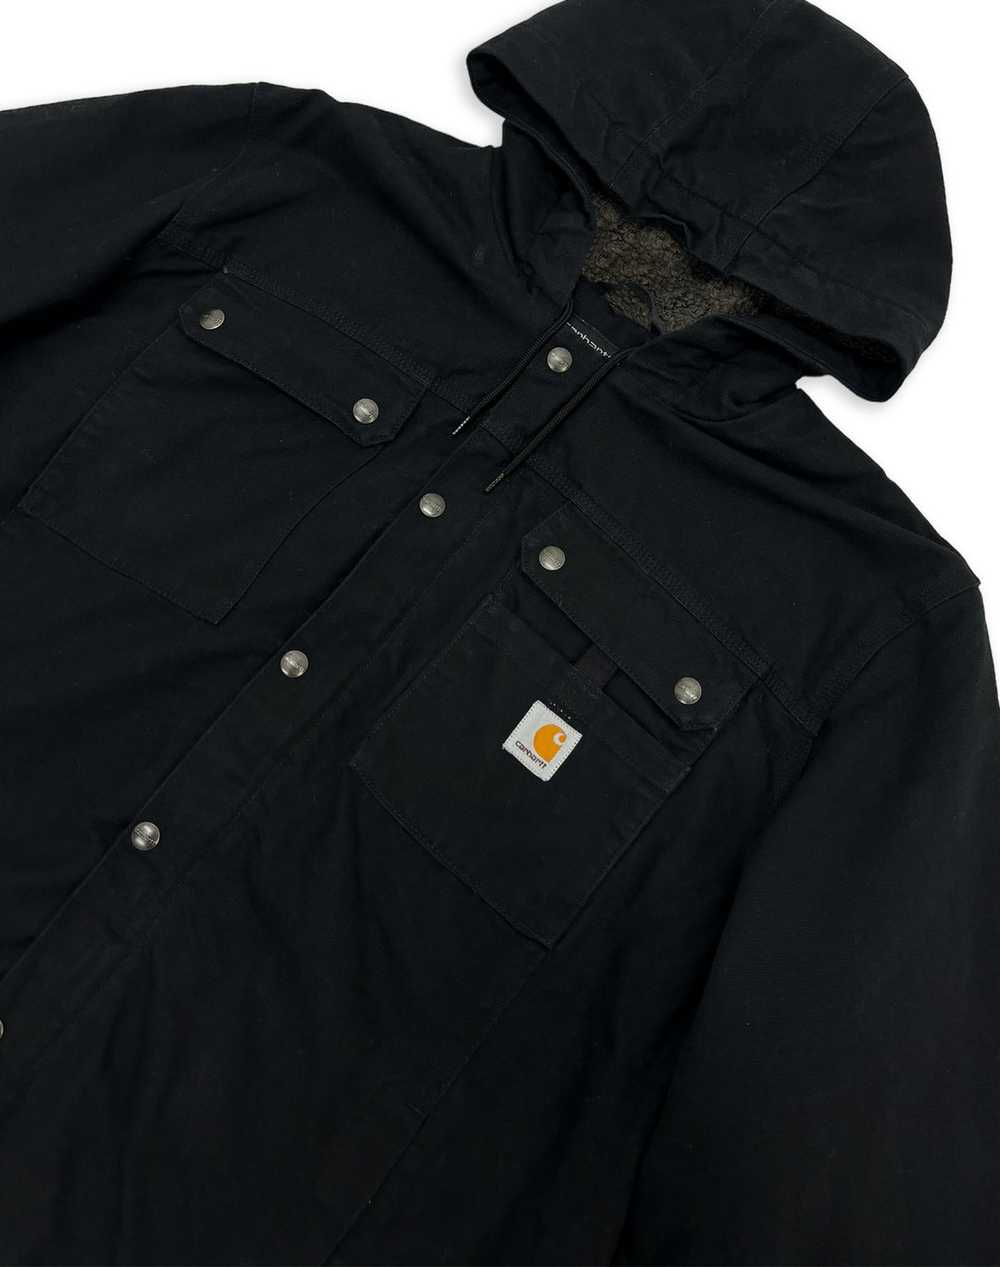 CARHARTT BLACK LOOSE FIT BUTTON JACKET (XL) - image 3